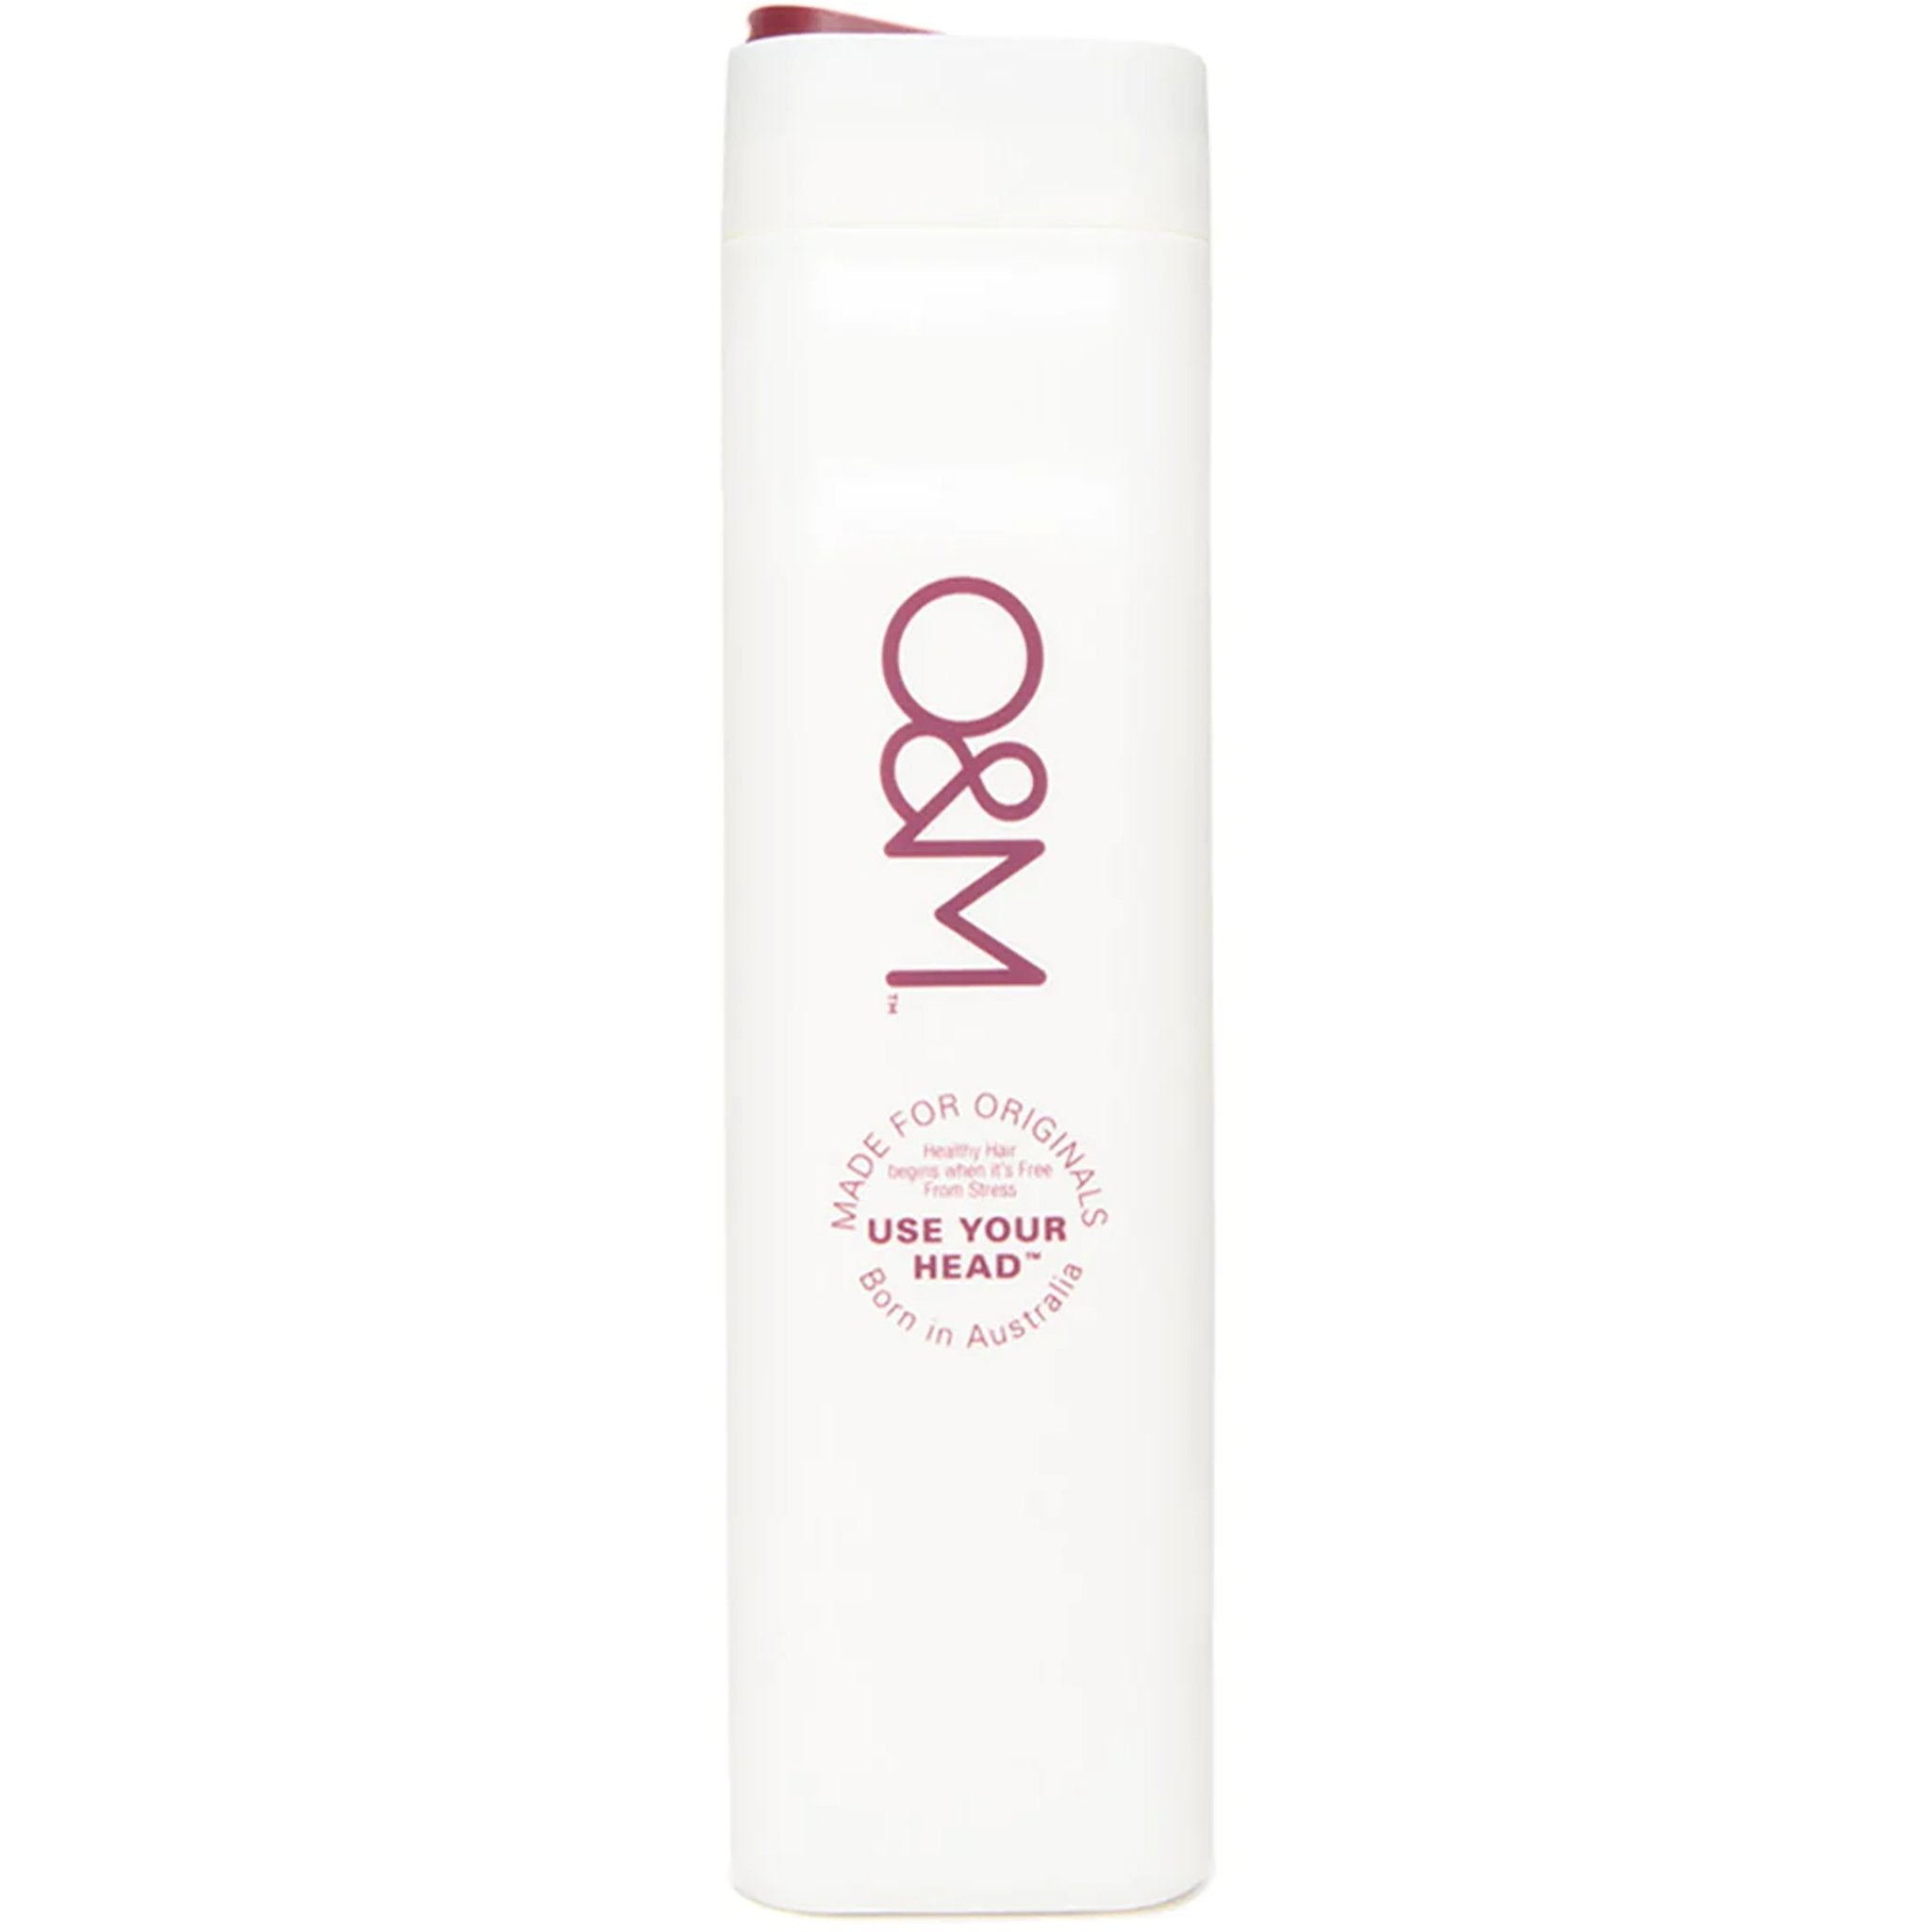 O&M. Shampoing Hydrate and Conquer - 1000 ml - Concept C. Shop